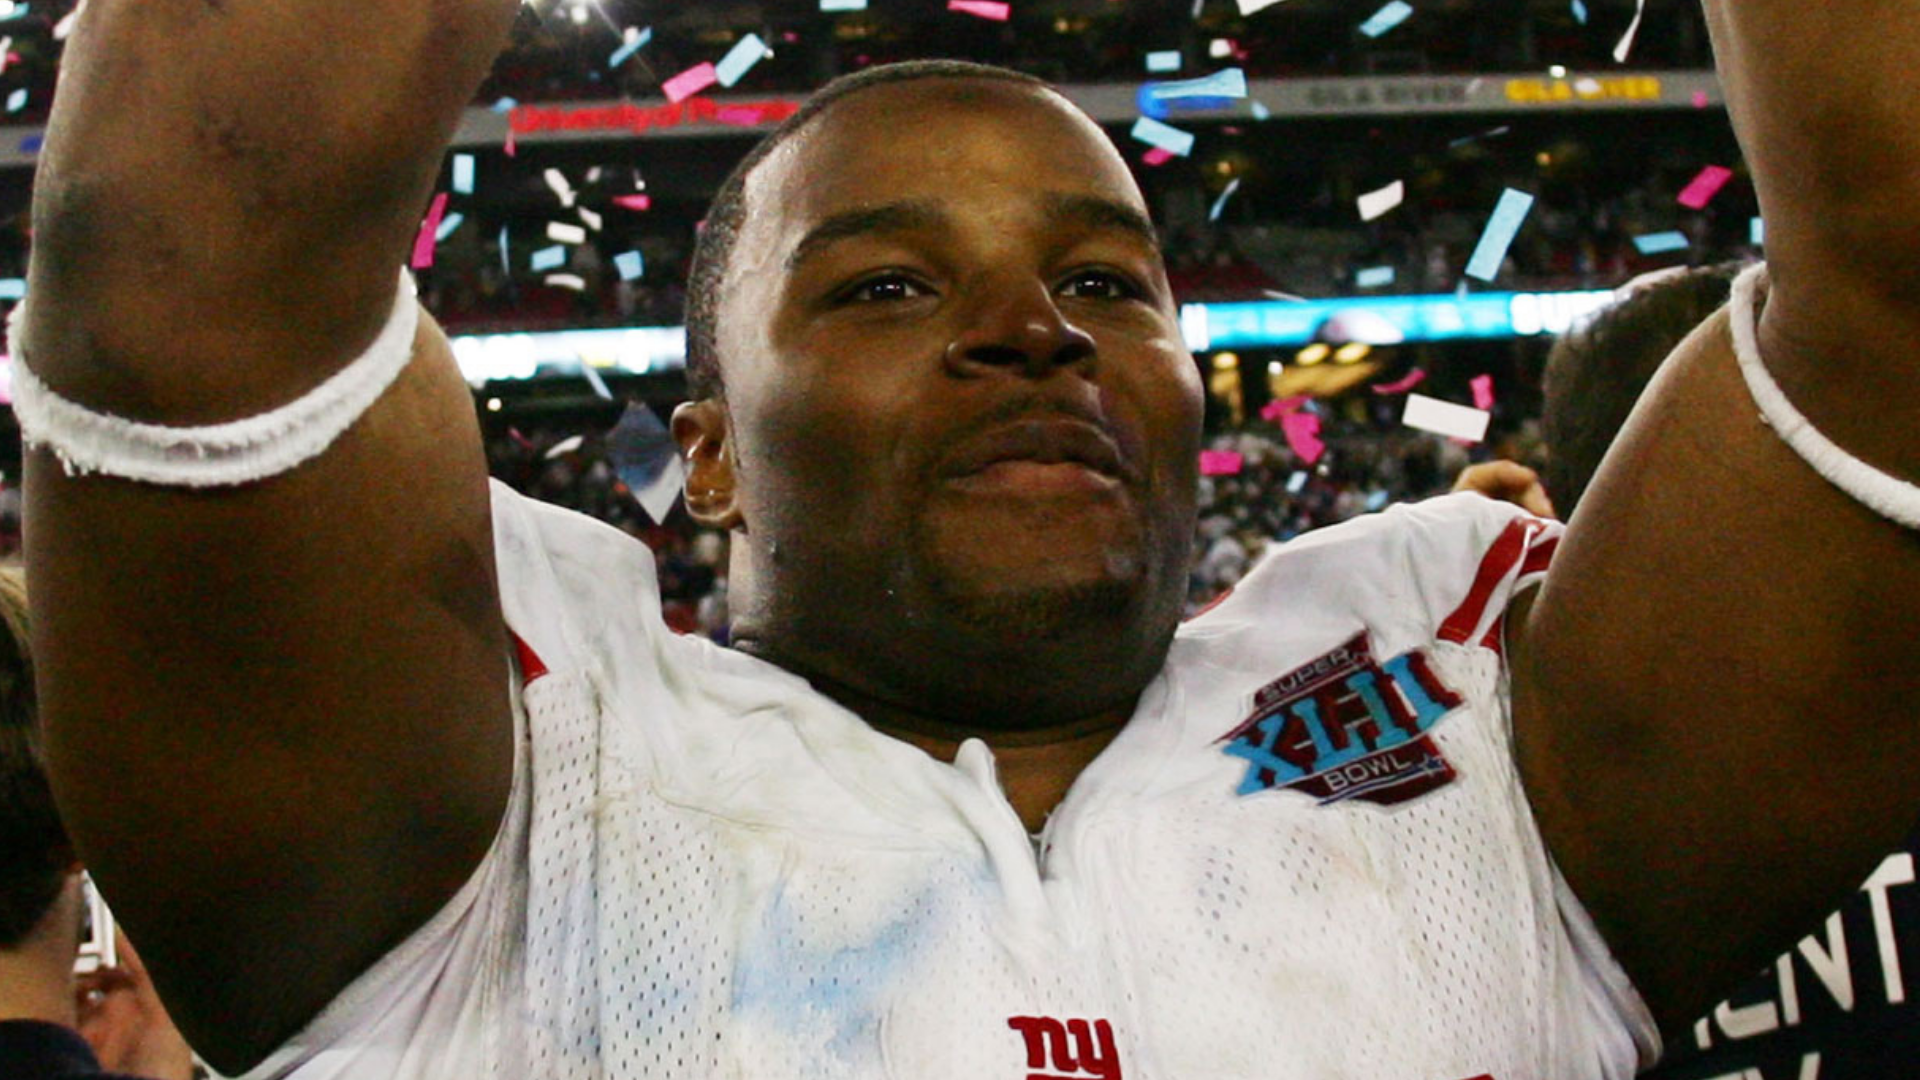 Two-time Super Bowl winner Osi Umenyiora. Image credit: Harry How/Getty Images